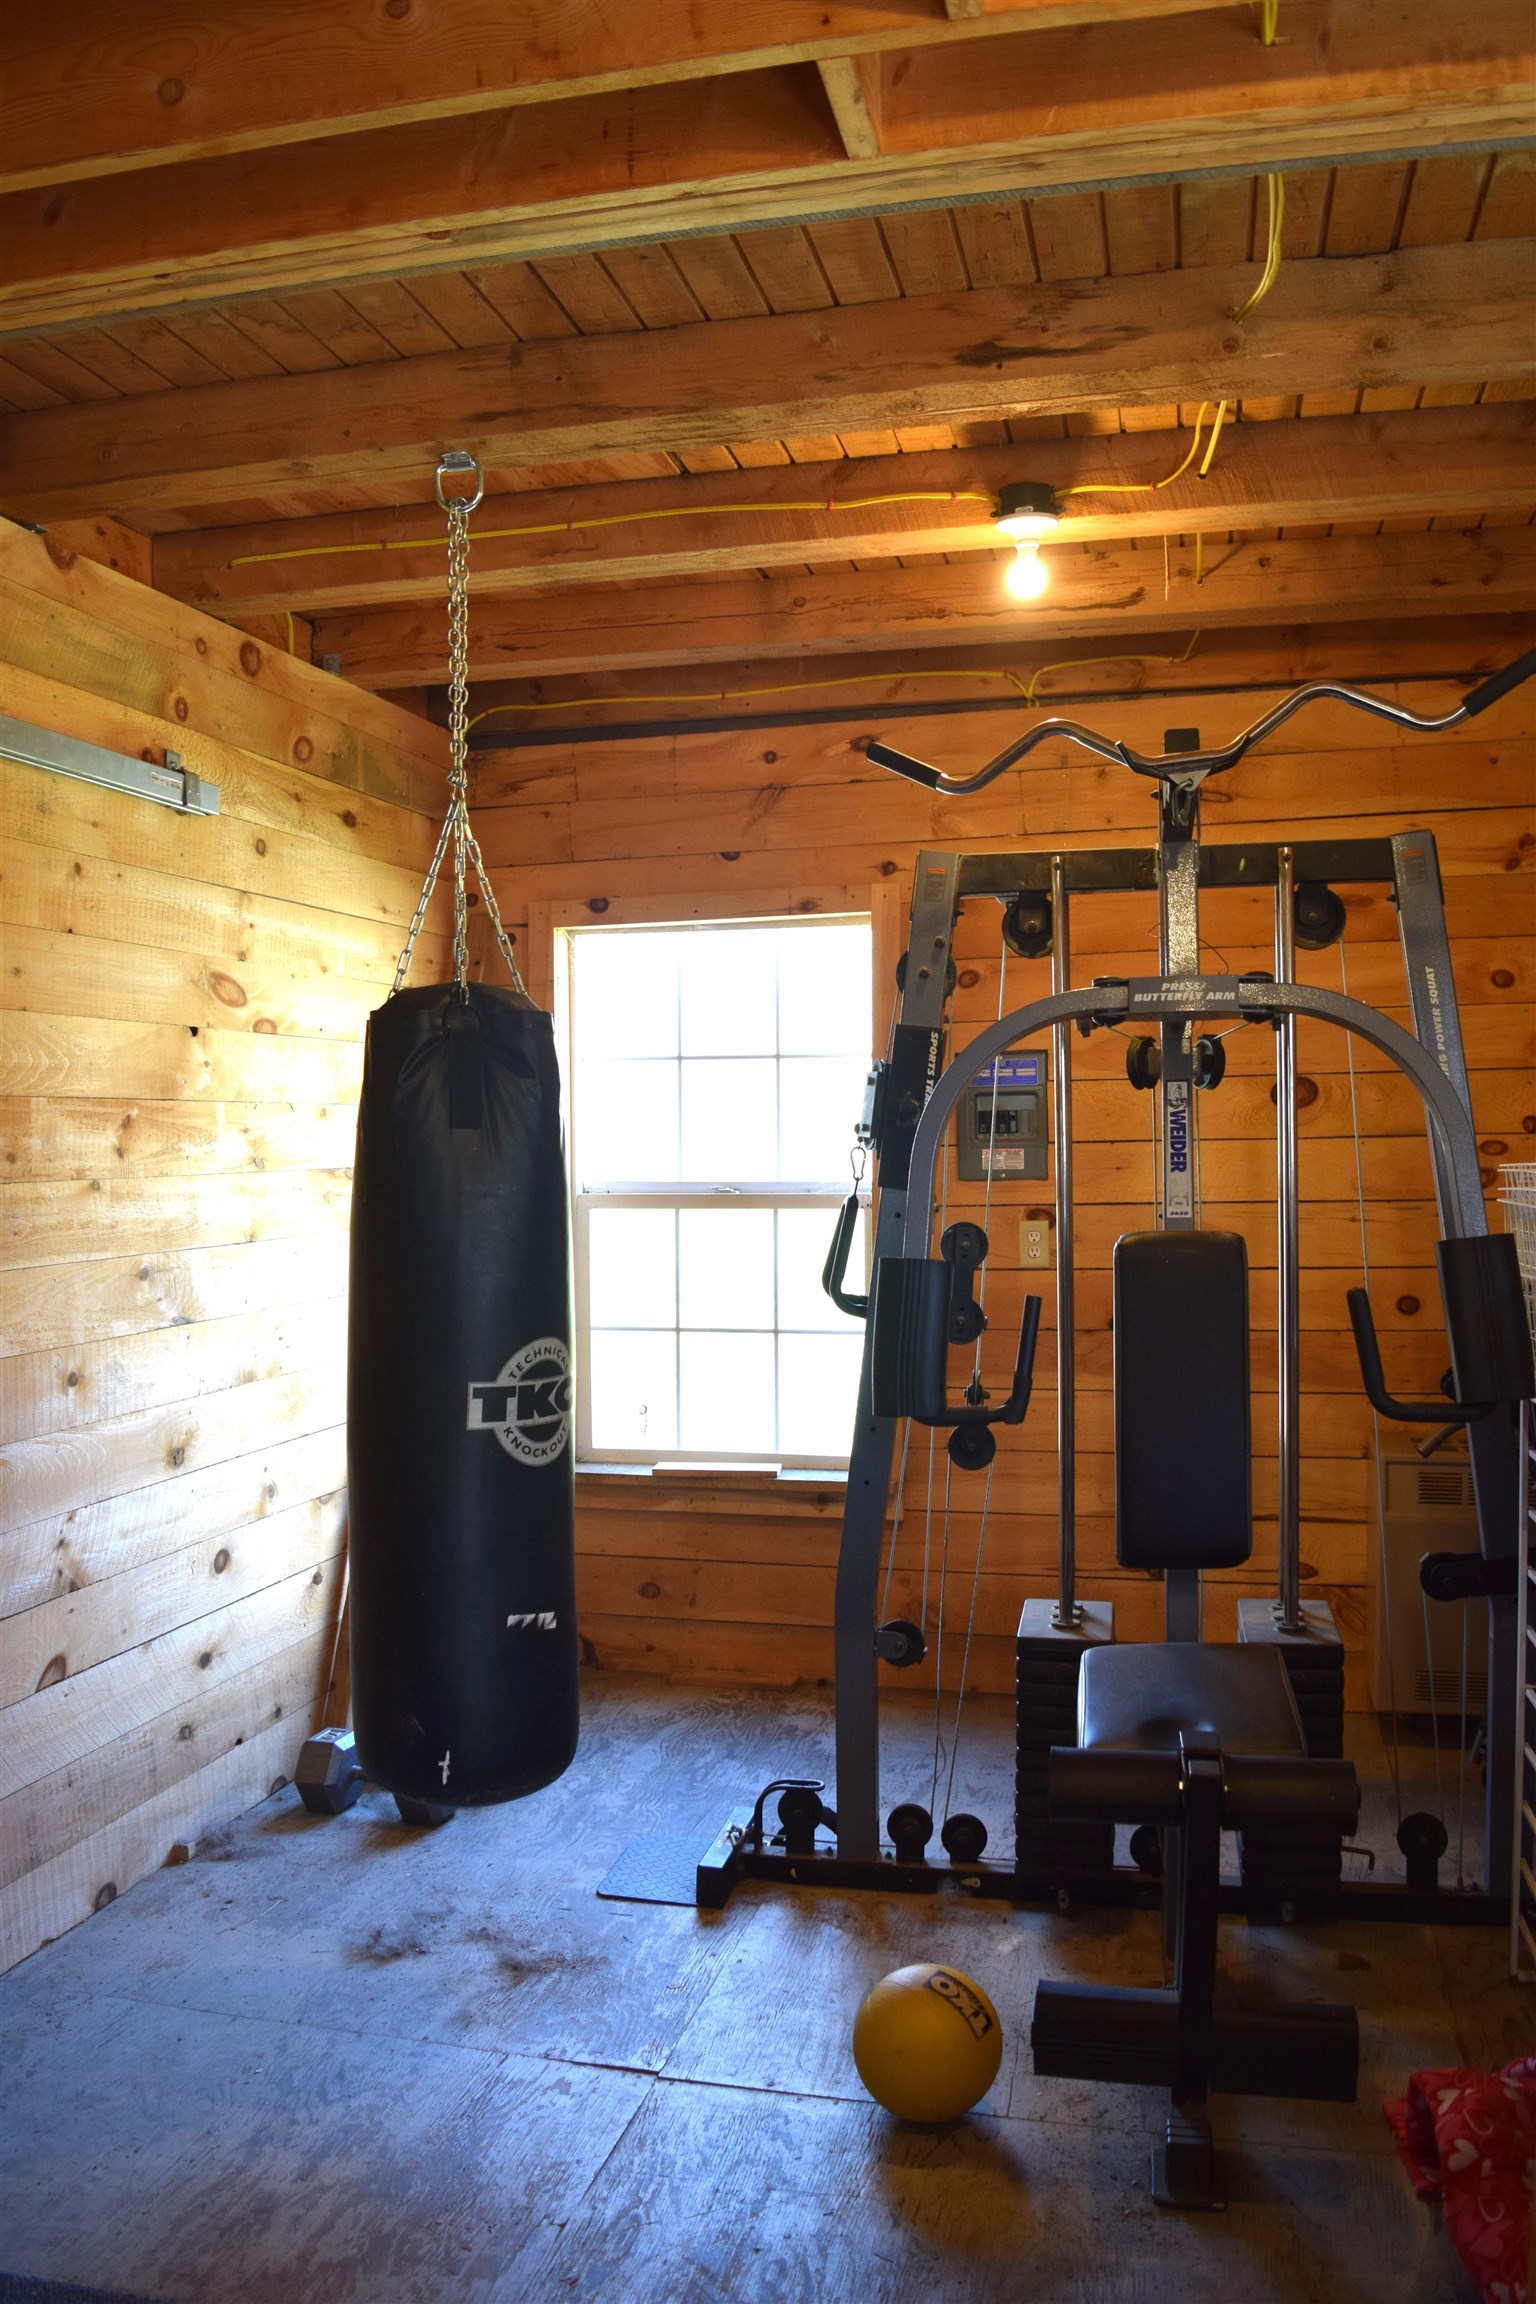 Gym room in cabin like building